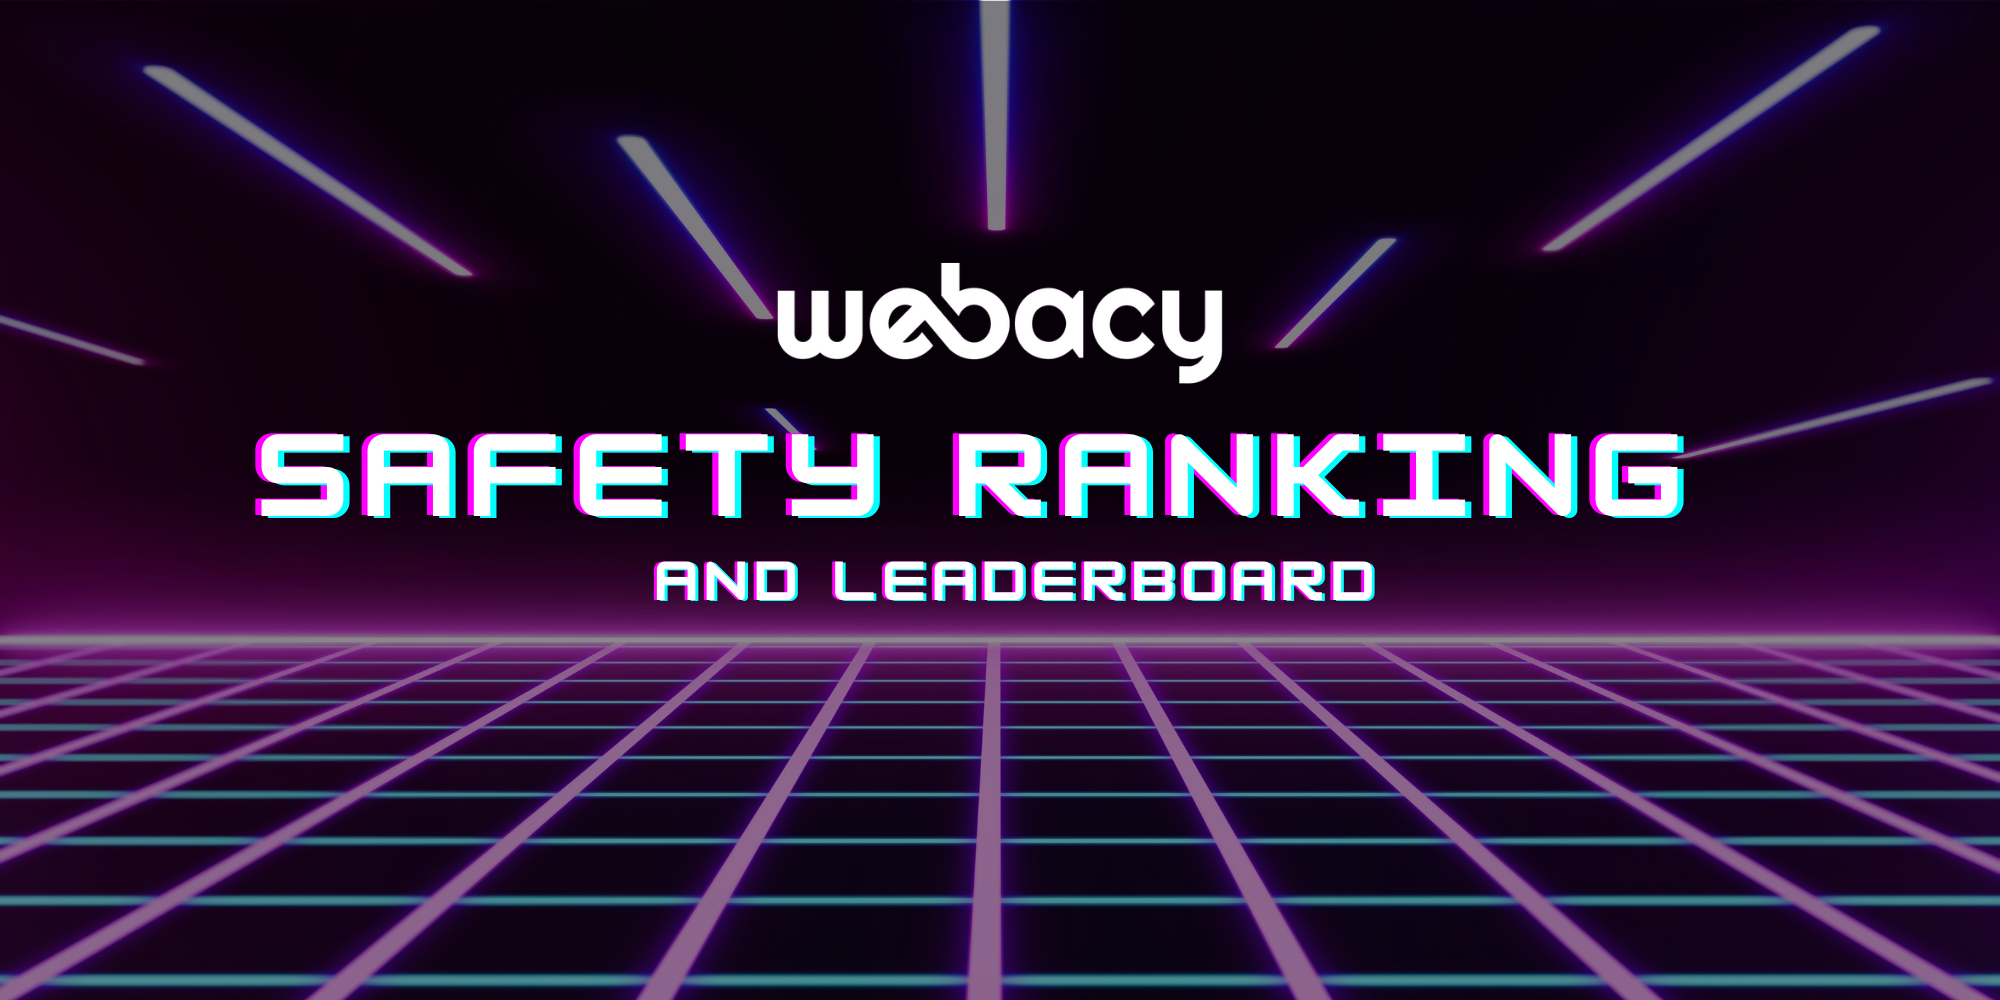 The Webacy Safety Ranking and Leaderboard: What and Why